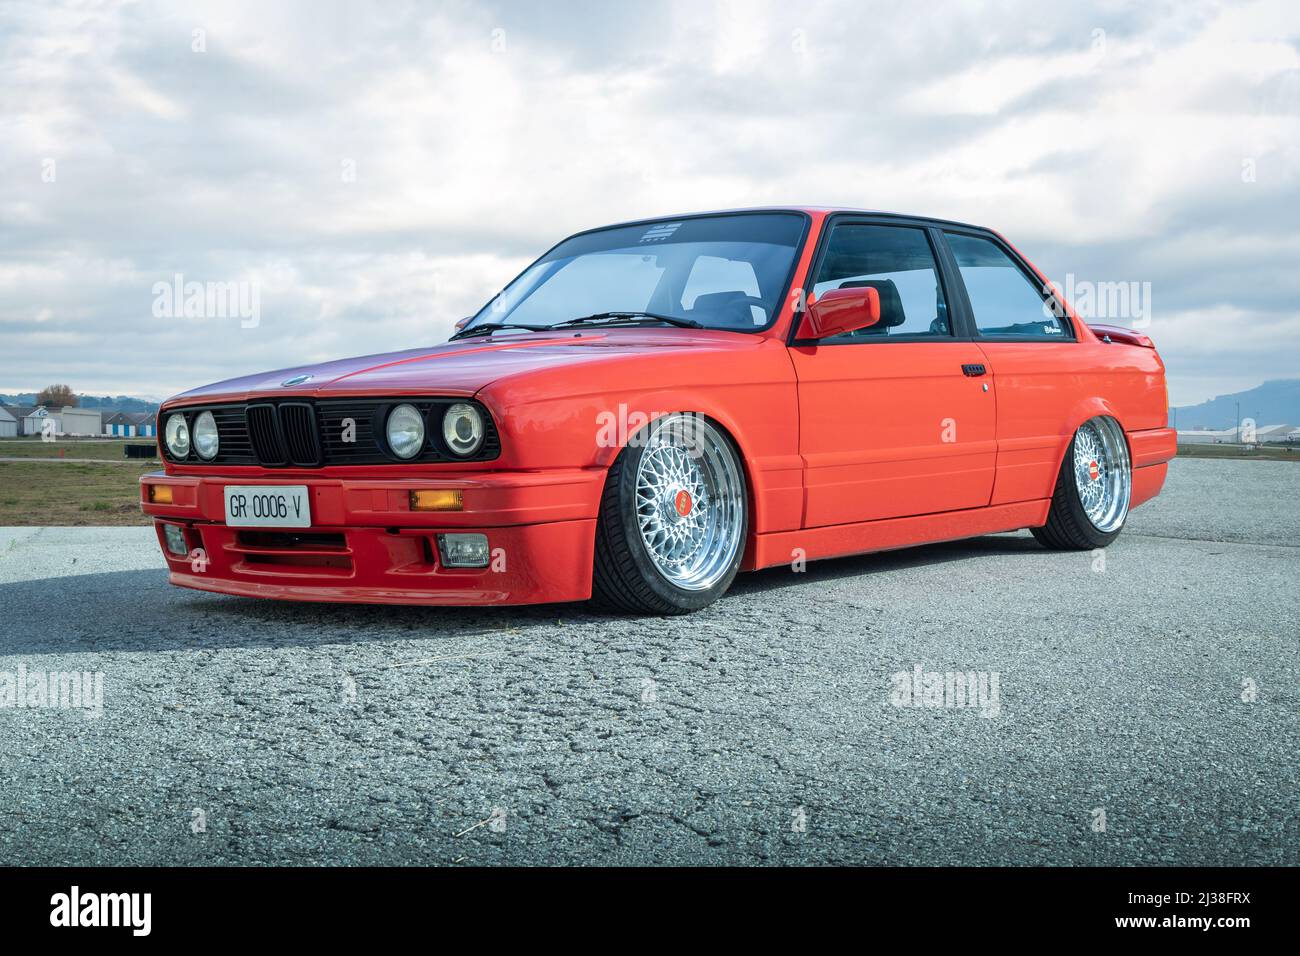 BMW 3-series sports car, with body tuning, production years ca. 1984-1991  Stock Photo - Alamy